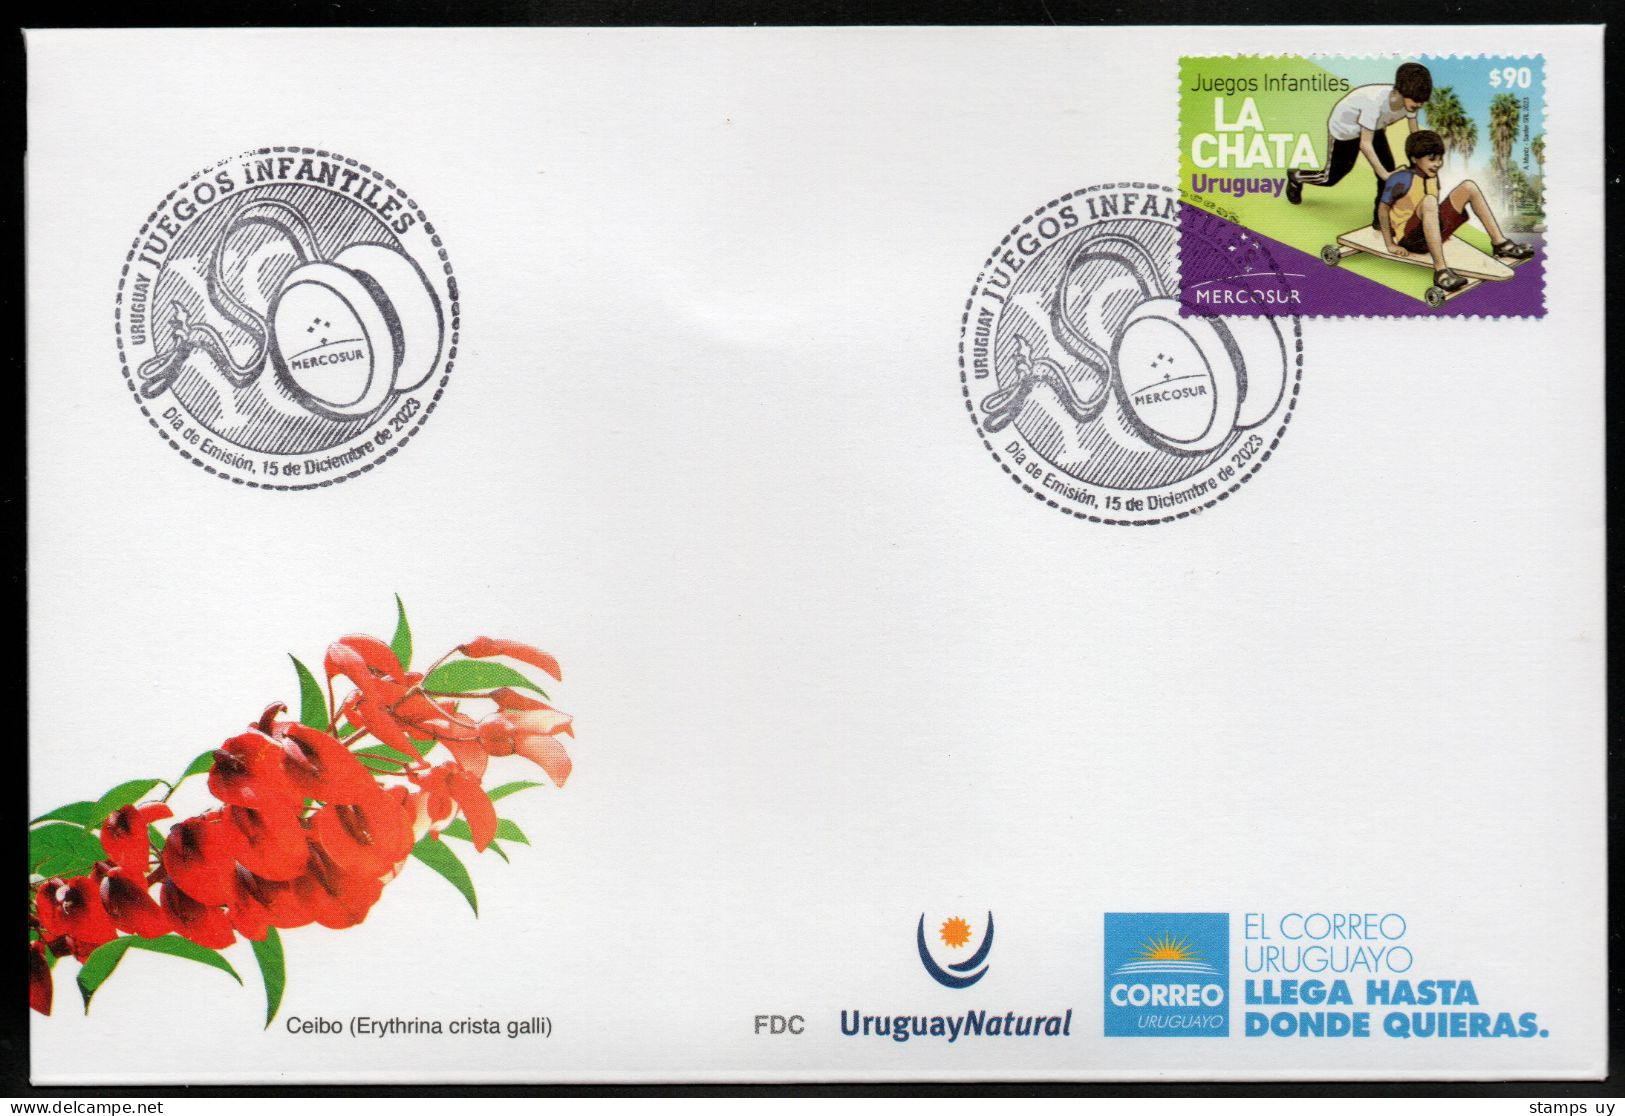 URUGUAY 2023 (Joint Issue, Mercosur, Games, Children, Toys, Wooden Cart, YoYo, Ruleman, Palm, Tree, Crux, Stars) - 1 FDC - Autres (Terre)